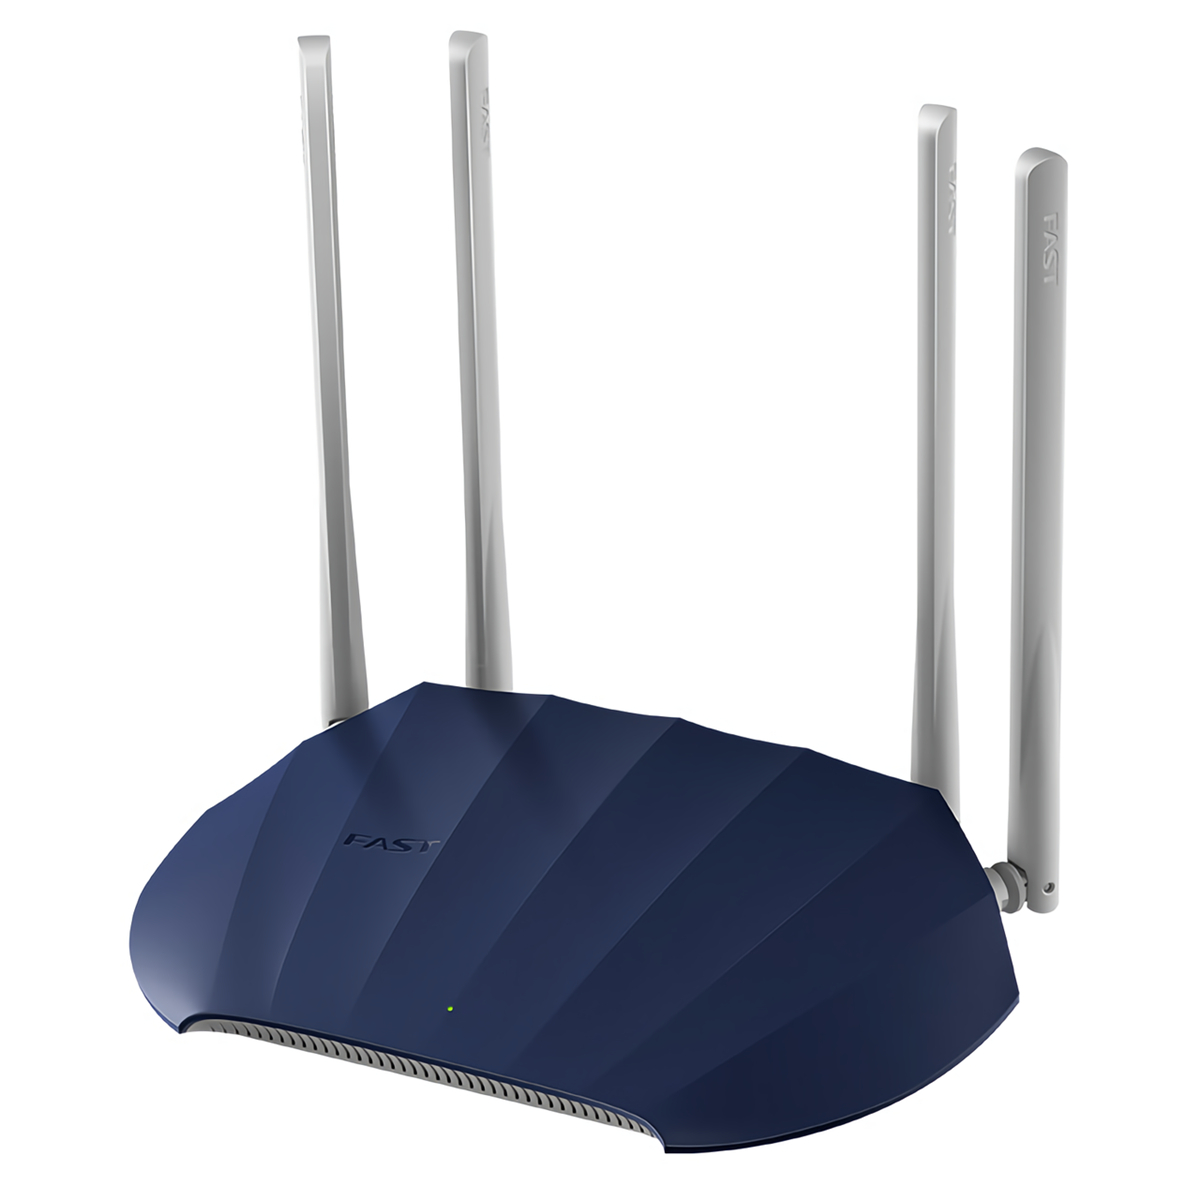 Find FAST FAC1200R Dual band Wireless Router 1200Mbps 2 4GHz/5GHz Fiber Optic High Speed Wall Penetrating Signal Booster Enhancer WiFi Signal Amplifier for Sale on Gipsybee.com with cryptocurrencies